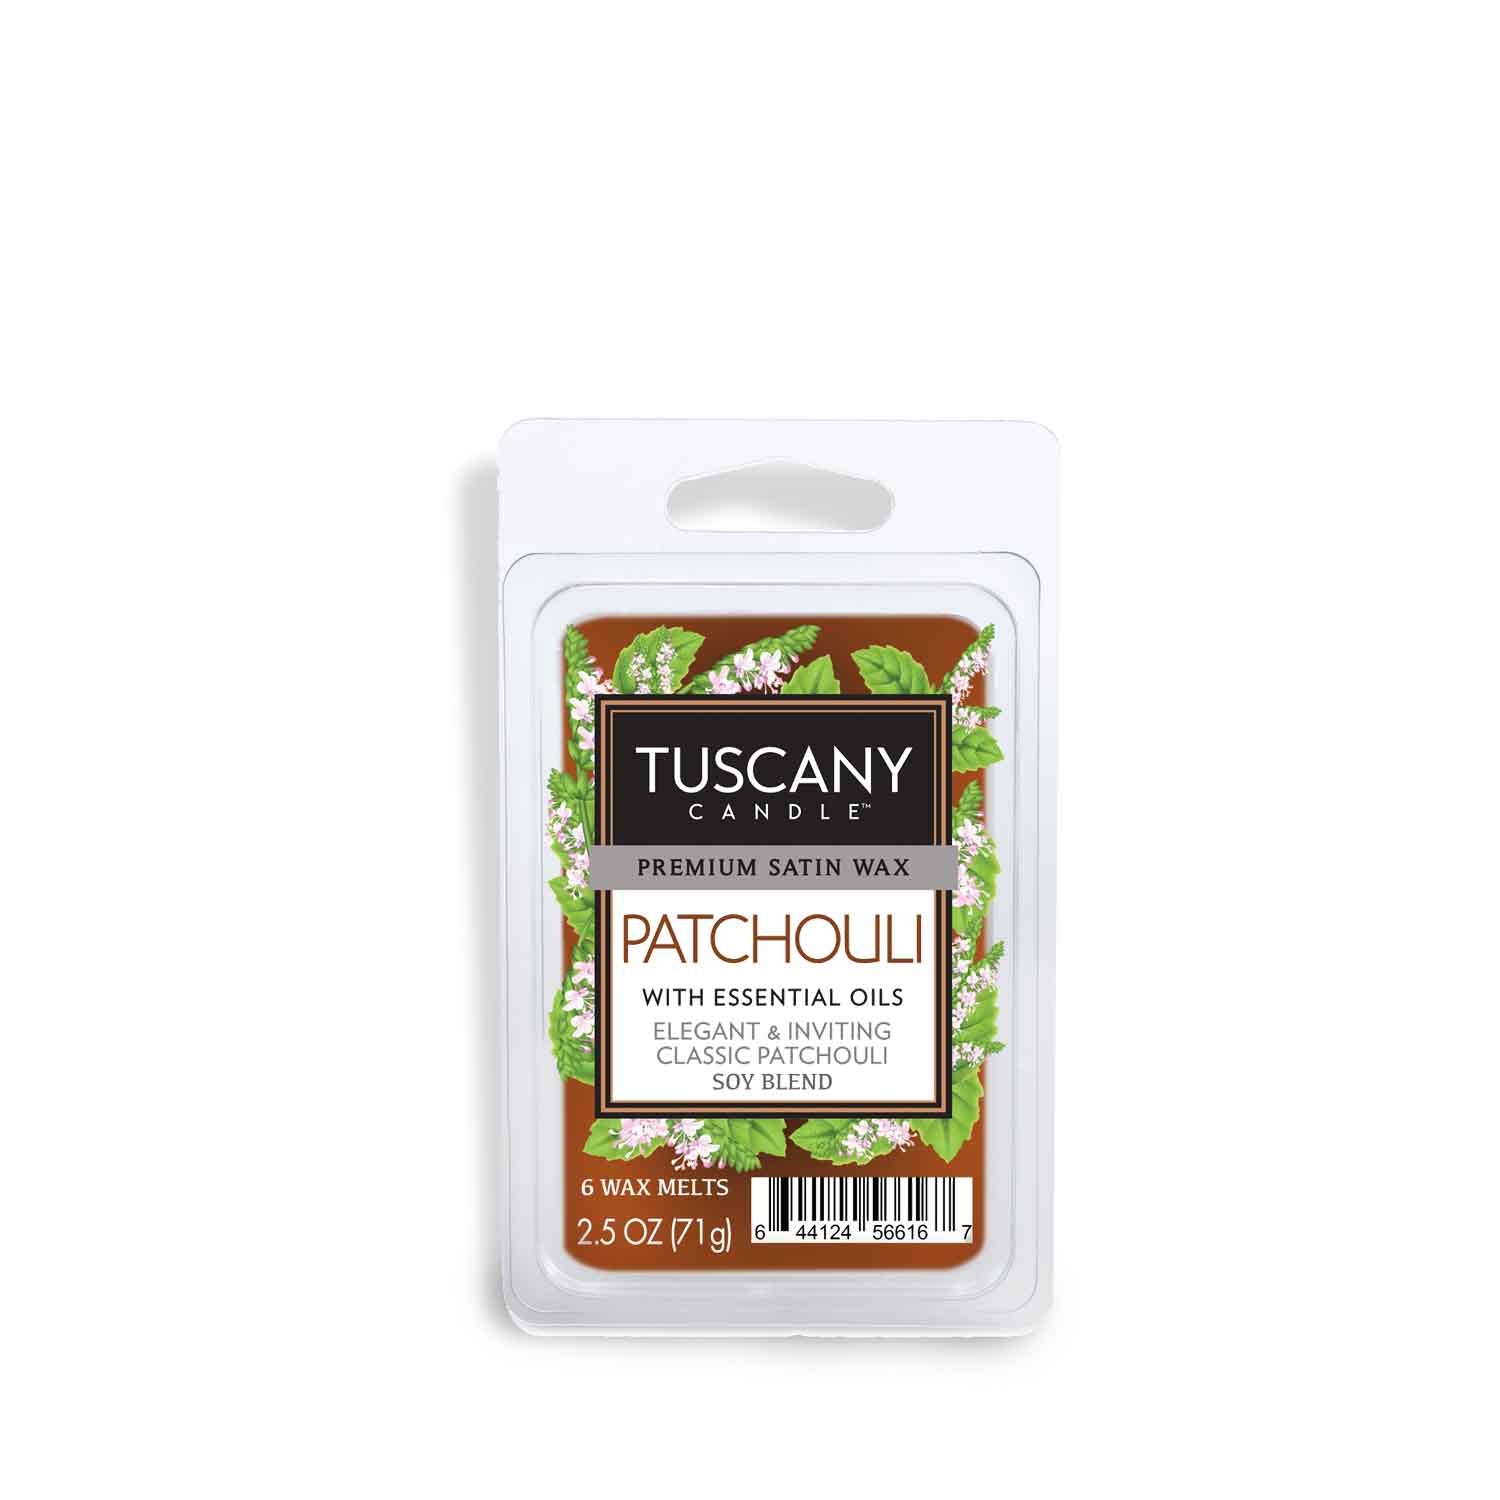 Experience the captivating fragrance of our Patchouli Scented Wax Melt (2.5 oz) from Tuscany Candle®. Our Tuscany-inspired wax melt tart bars will transport you to a land of serenity and bliss. Enjoy the rich aroma that